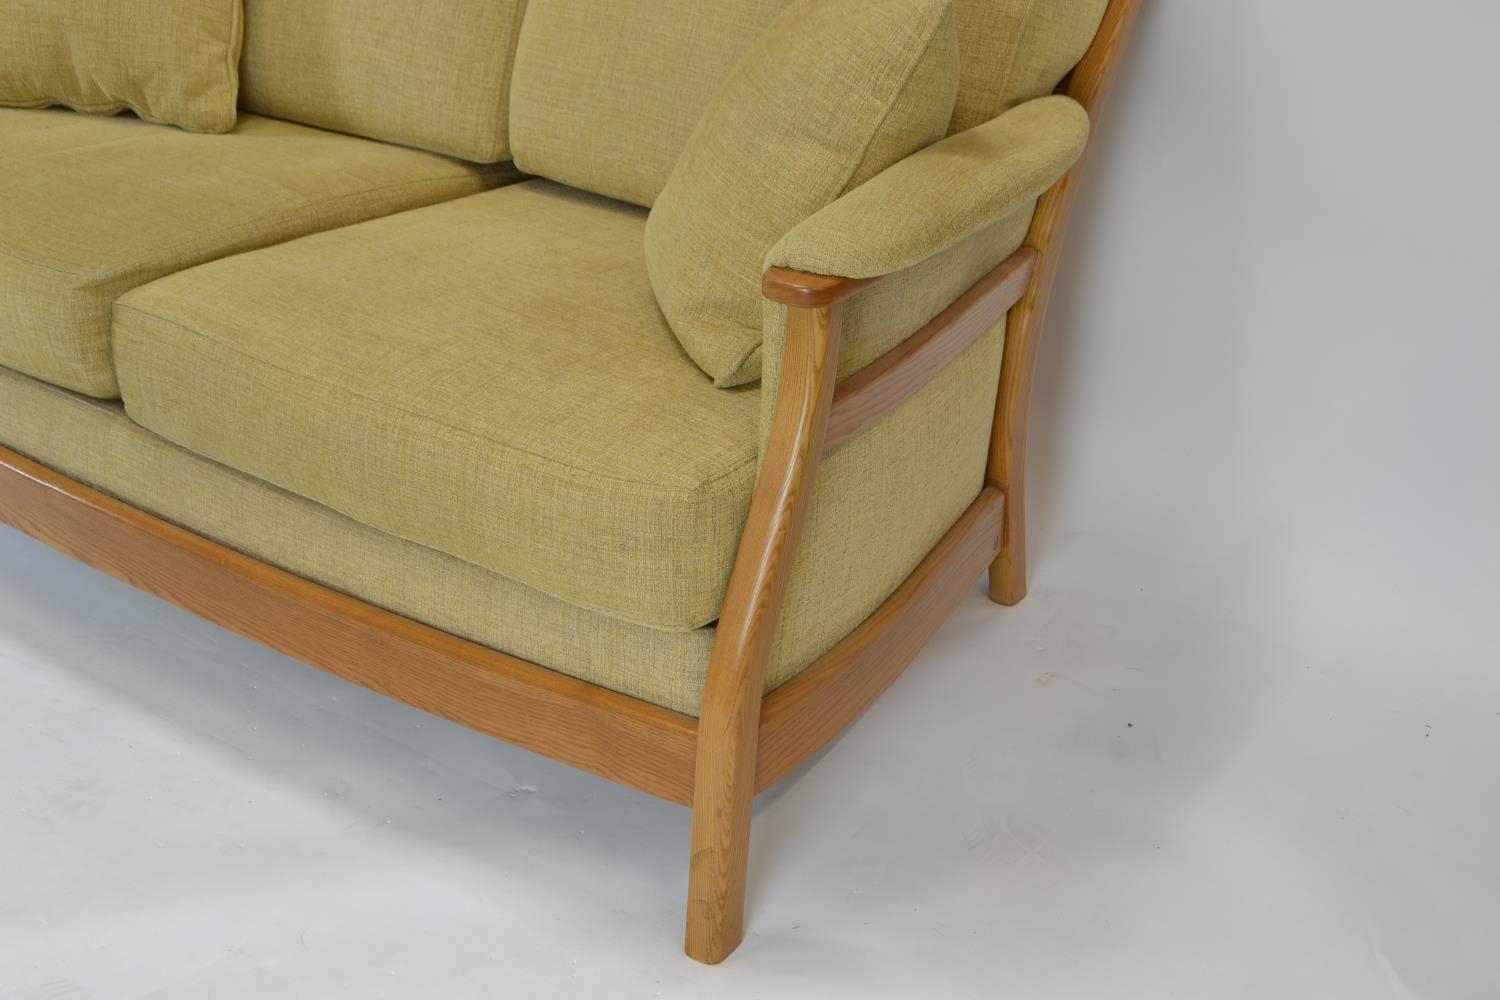 Elm framed two seater Ercol sofa in natural finish h90cm x w144cm x d70cm  - Image 2 of 4